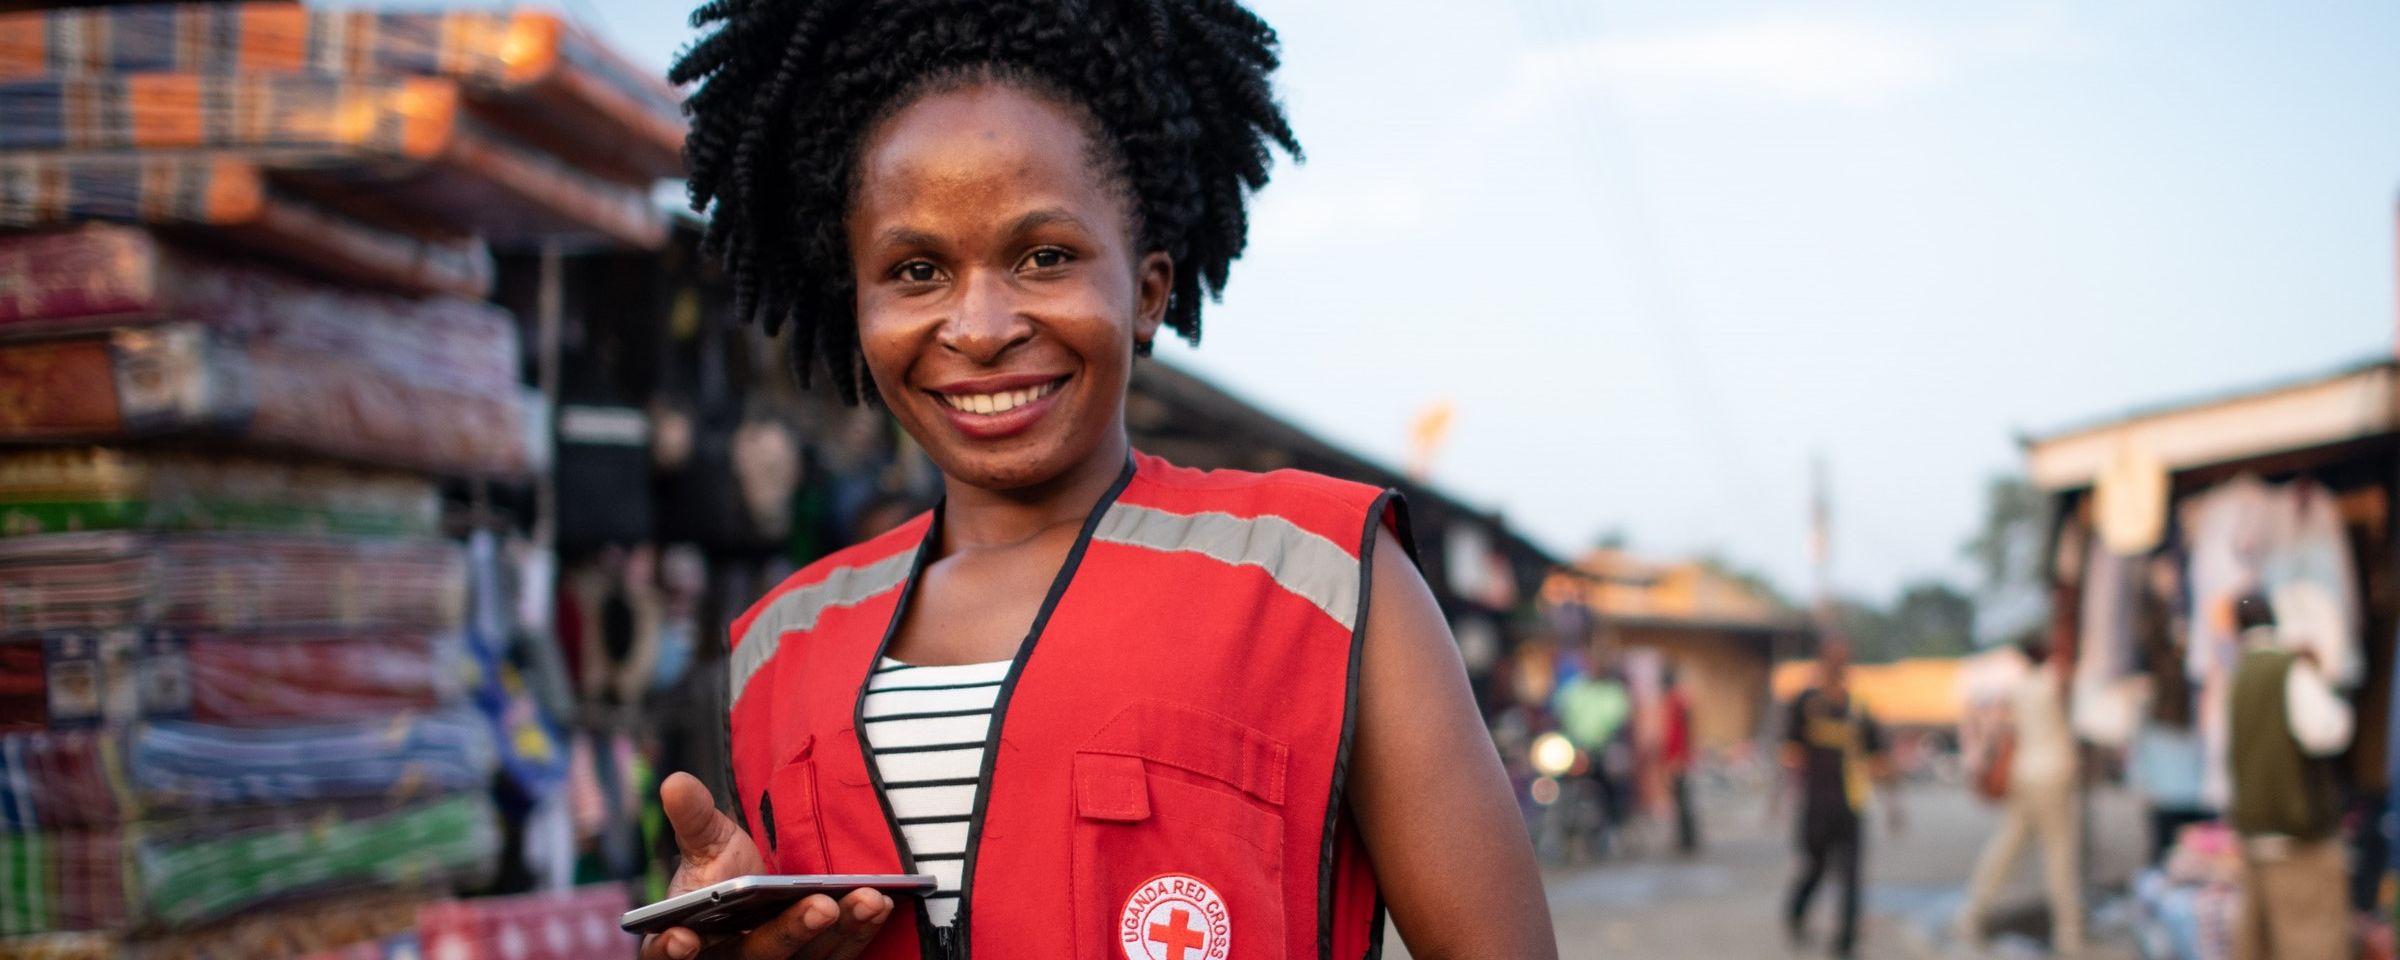 Data to the rescue: improving humanitarian aid | 510 – an initiative of the Netherlands Red Cross